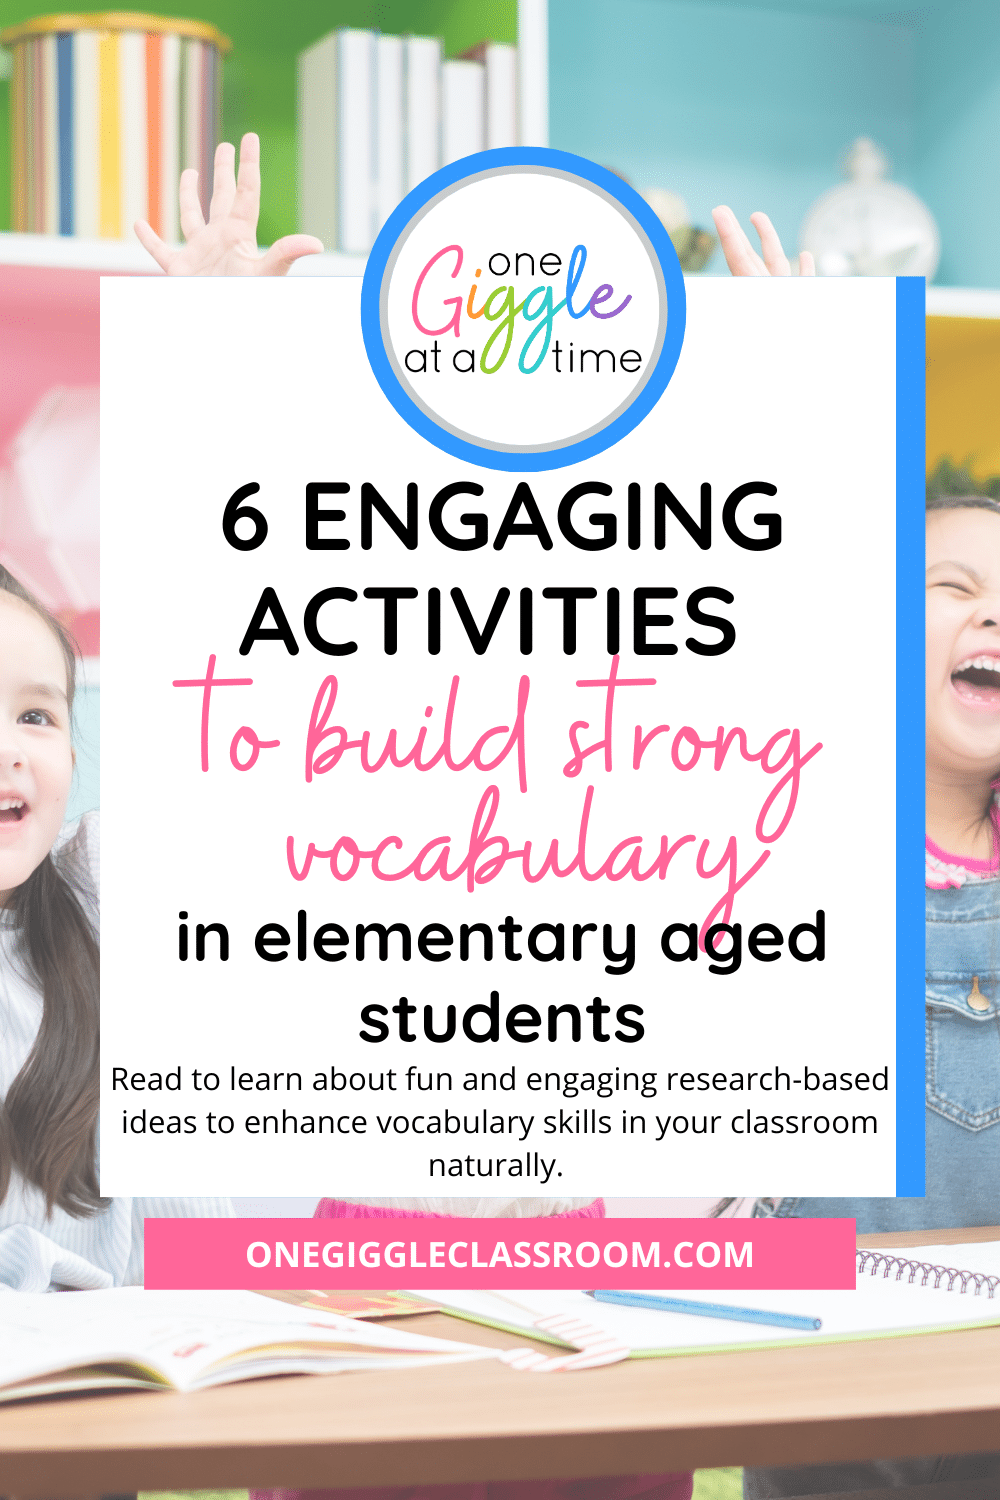 activities-to-build-strong-vocabulary-with-elementary-aged-students